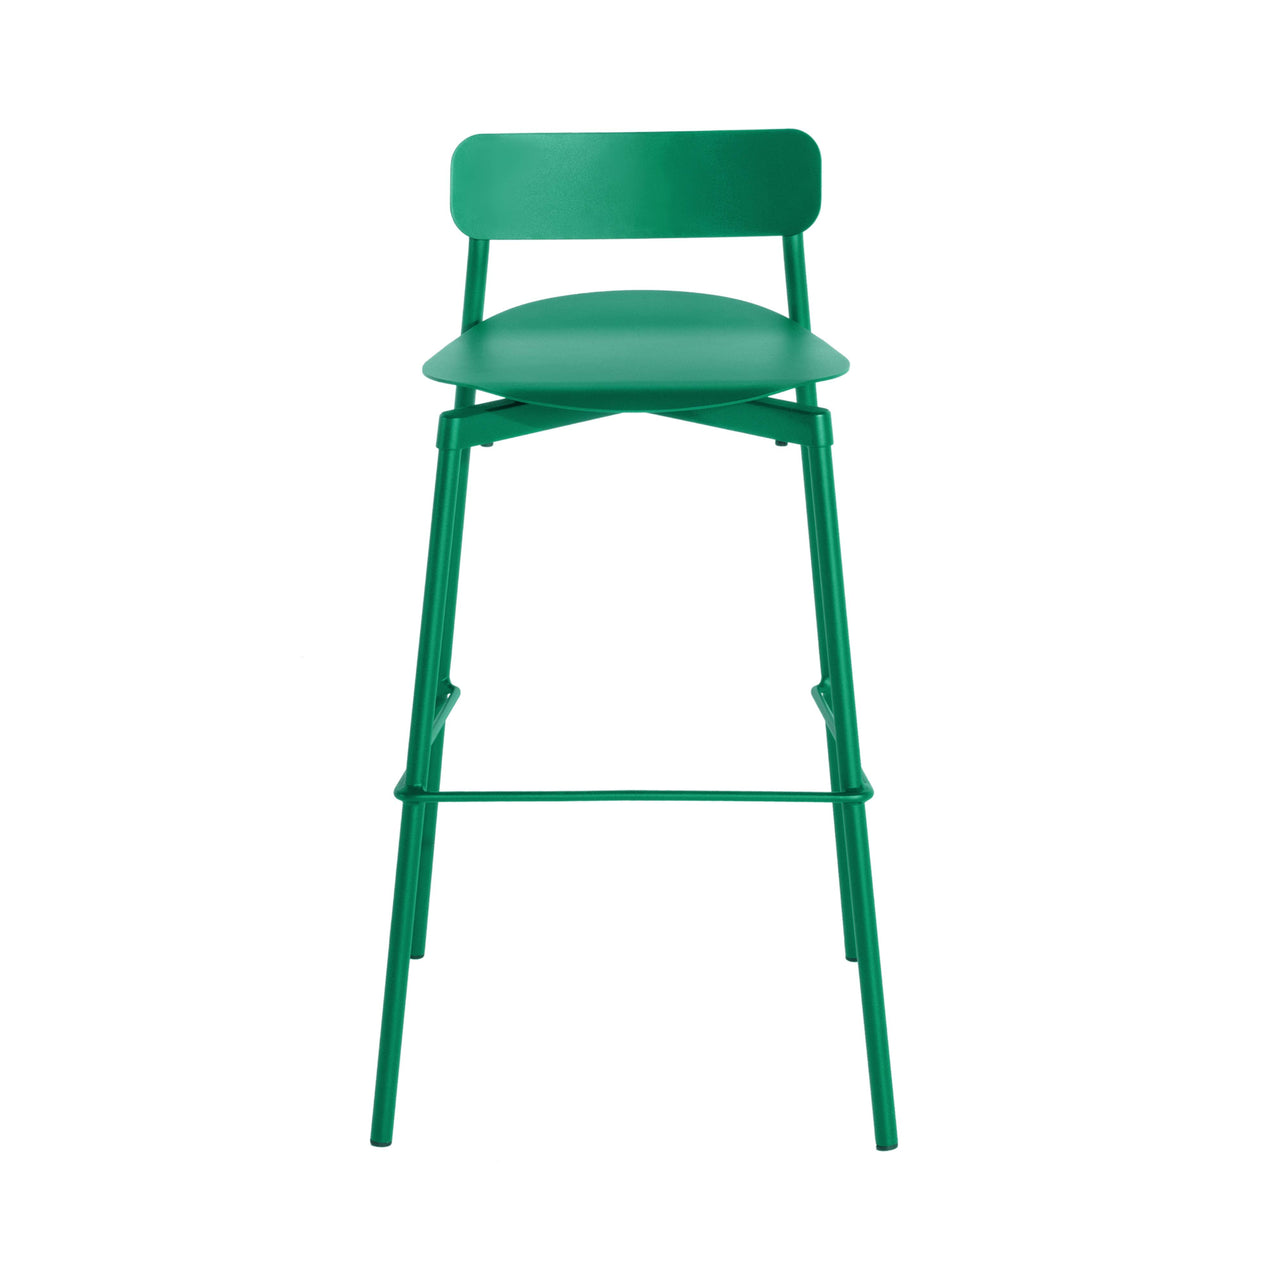  Fromme Stacking Bar + Counter Stool: Bar + Mint Green